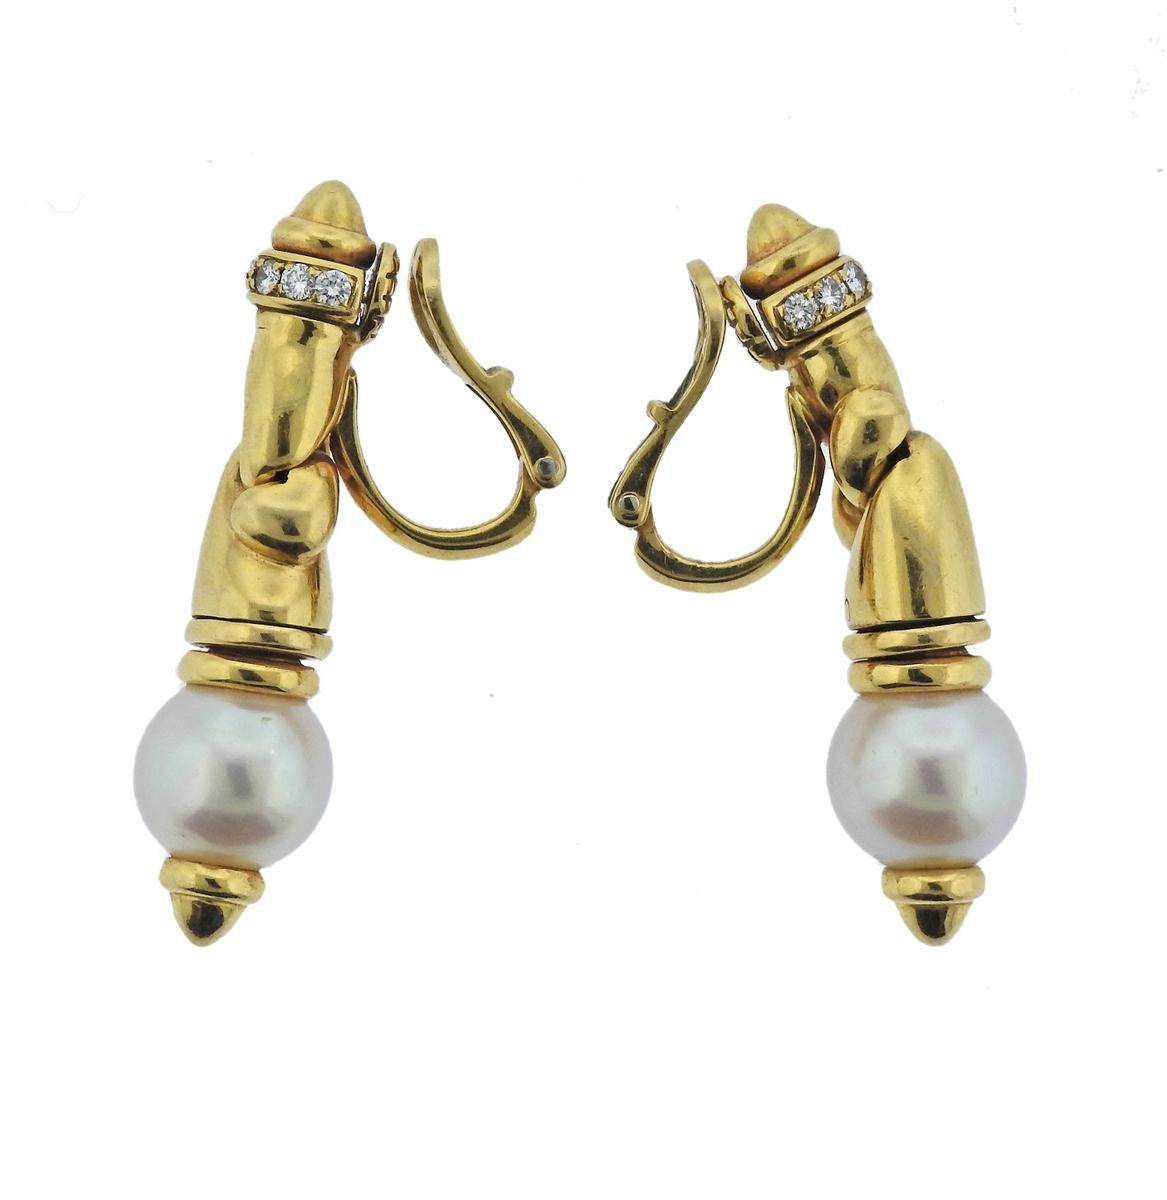 Pair of 18k golddrop earrings, crafted by Bvlgari, decorated with approx. 0.28ctw in G/VS diamonds and  9.5mm pearls. Earrings are 37mm long and weigh 22.1 grams. Marked Bvlgari, 750, 1989,  2337L, made in Italy.